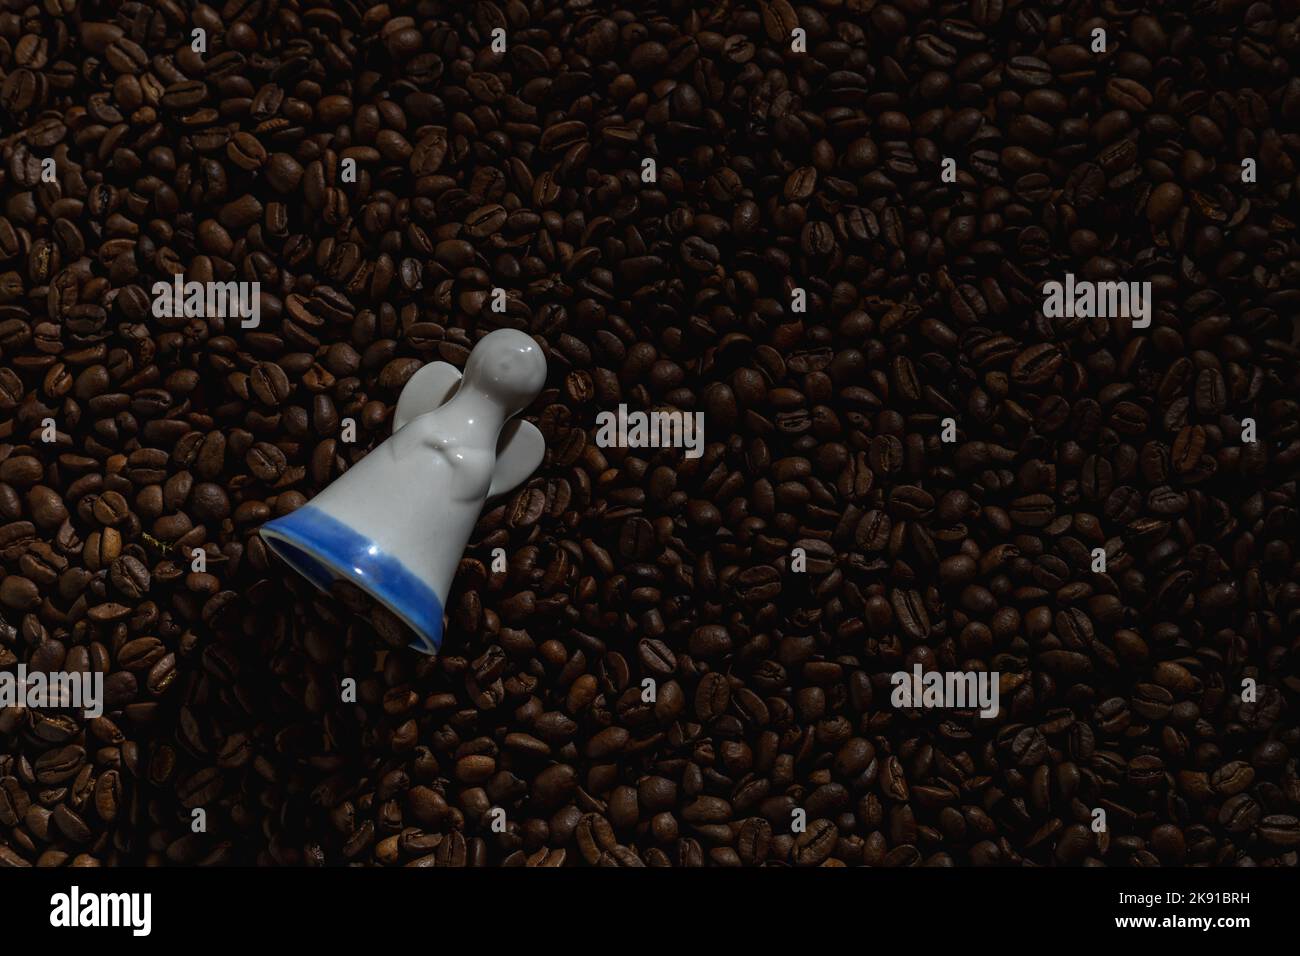 Figurine of an angel on a background of coffee beans Stock Photo